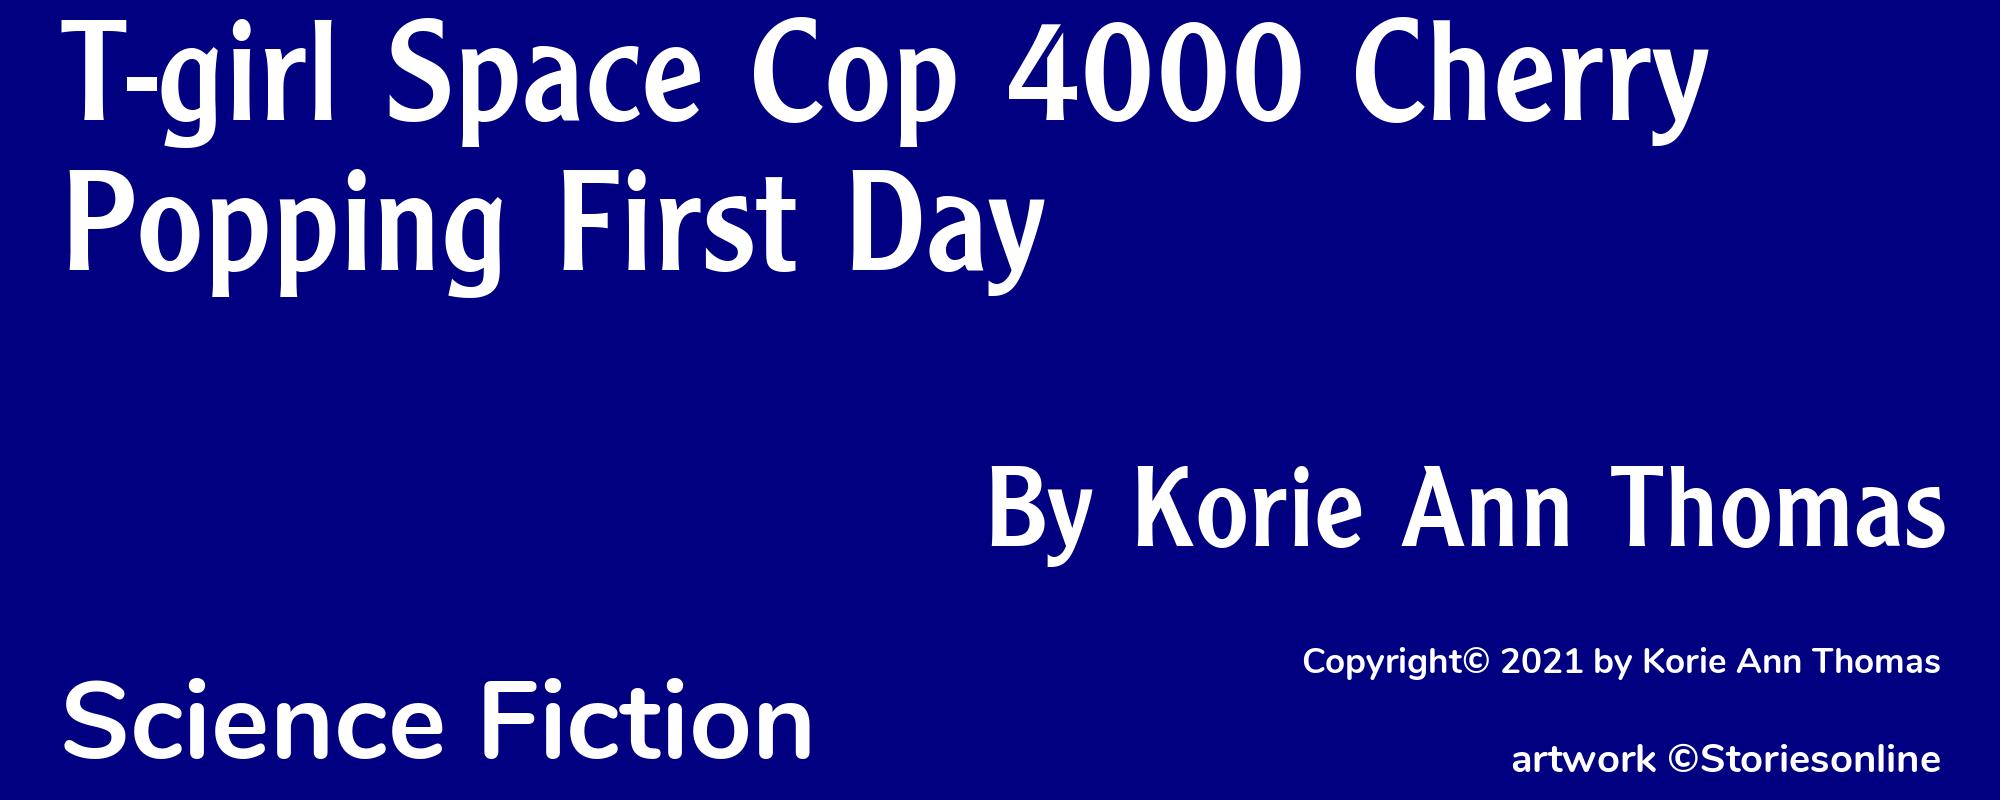 T-girl Space Cop 4000 Cherry Popping First Day - Cover